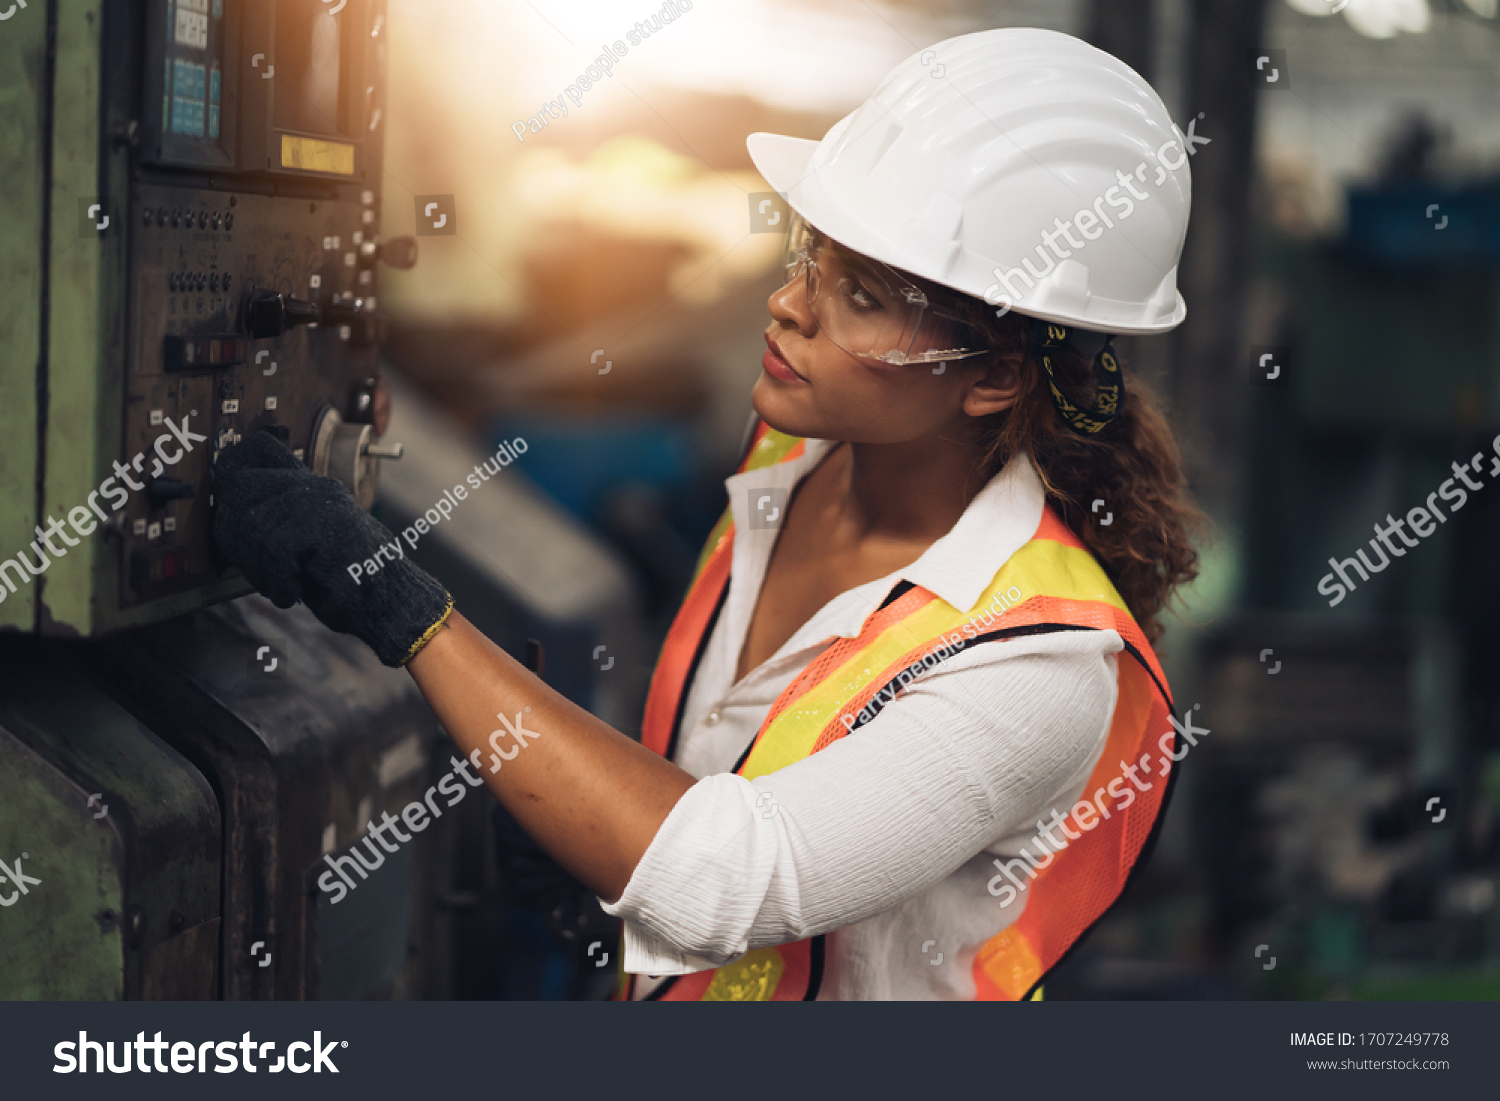 Professional engineer black women , worker, woman afican mechanical, maintenance, check in factory, warehouse Workshop for factory operators, engineering women training. Business factory industry. #1707249778